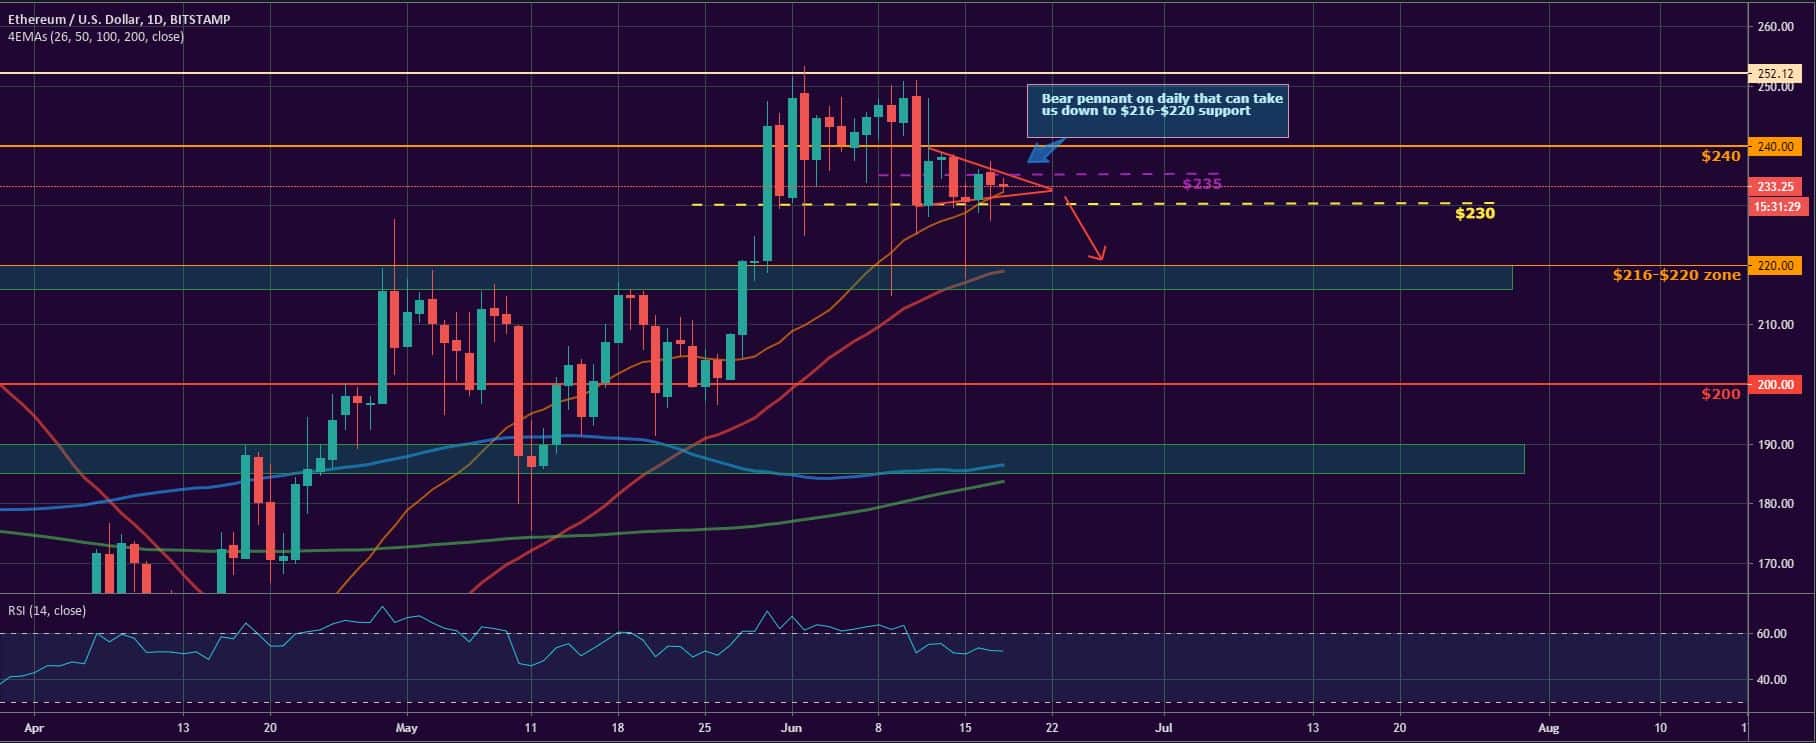 Bitcoin and Ether Market Update June 18, 2020 - 2